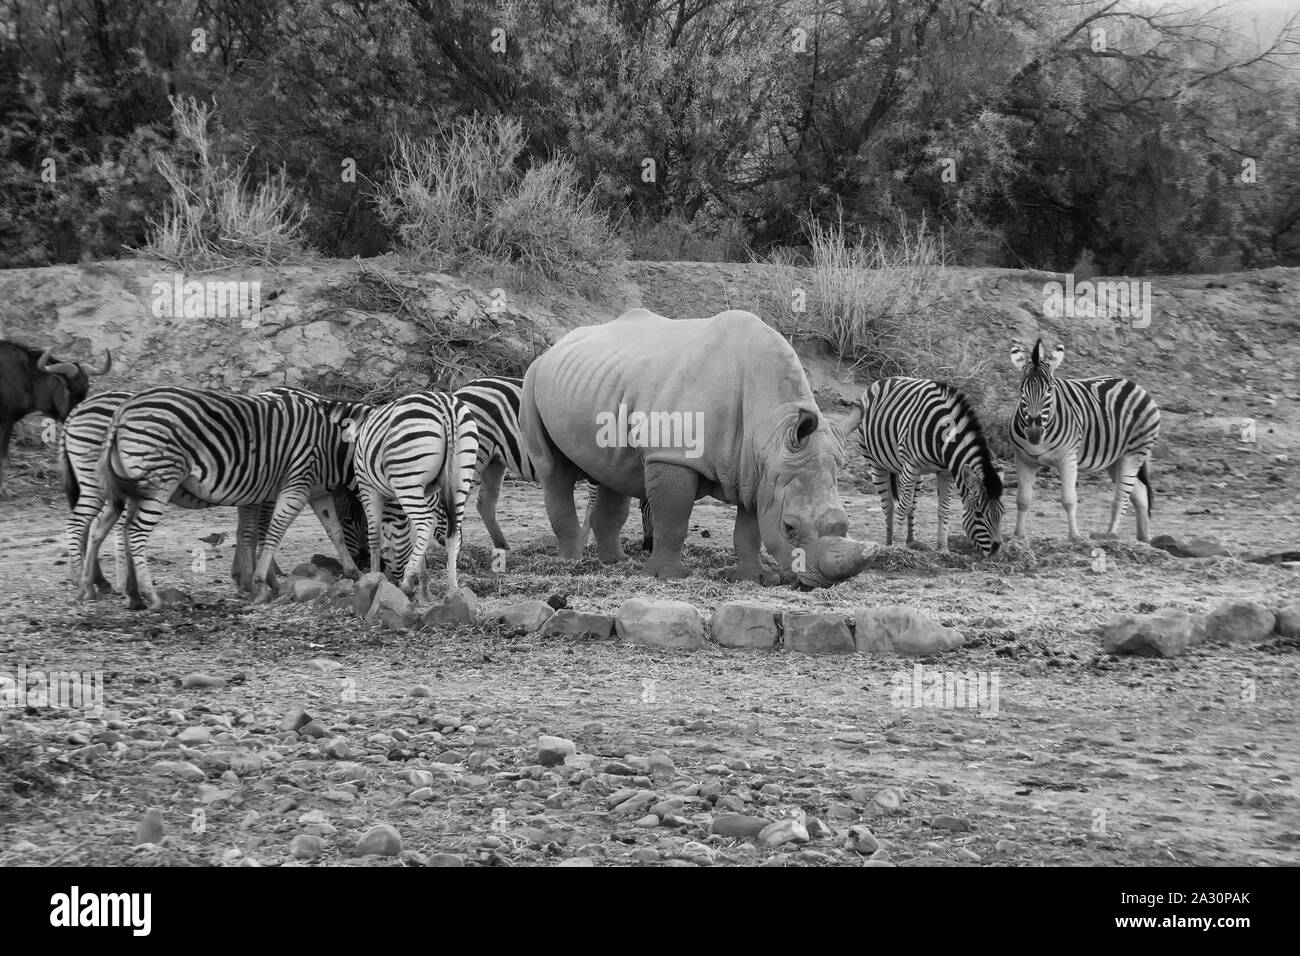 Rhinoceros and zebras together feeding in wild park in South Africa in black and white Stock Photo